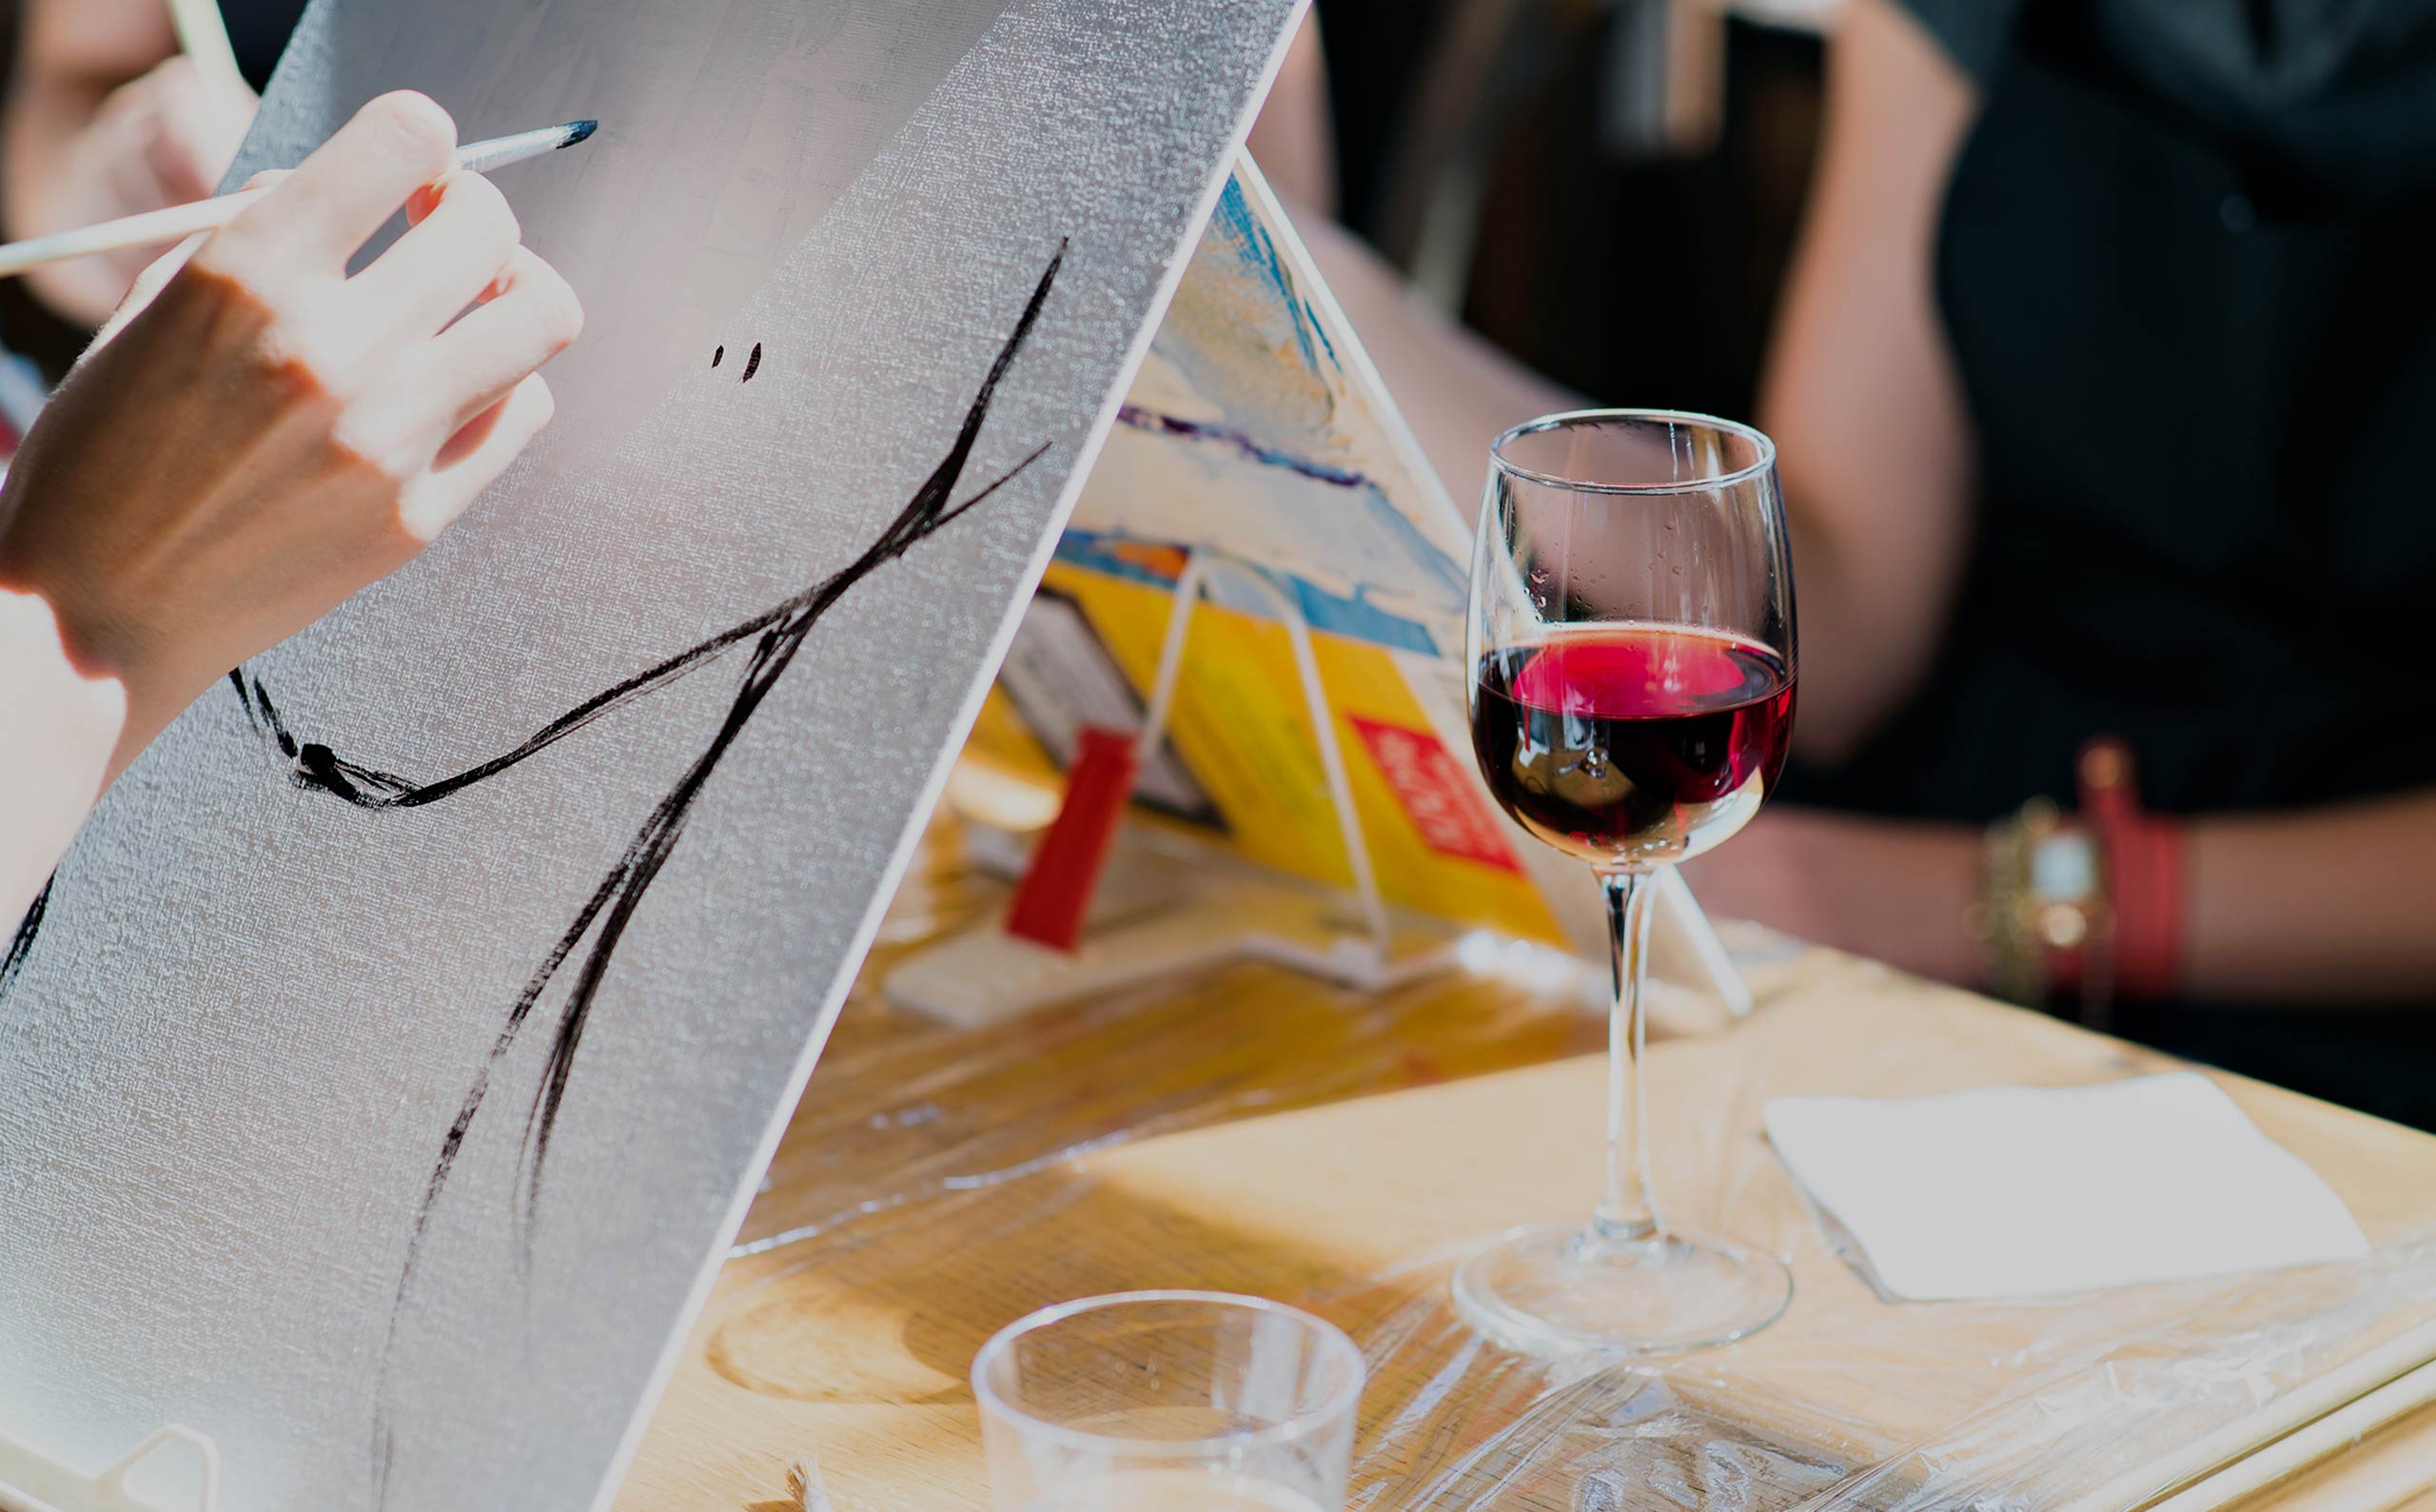 Paint your life and wine